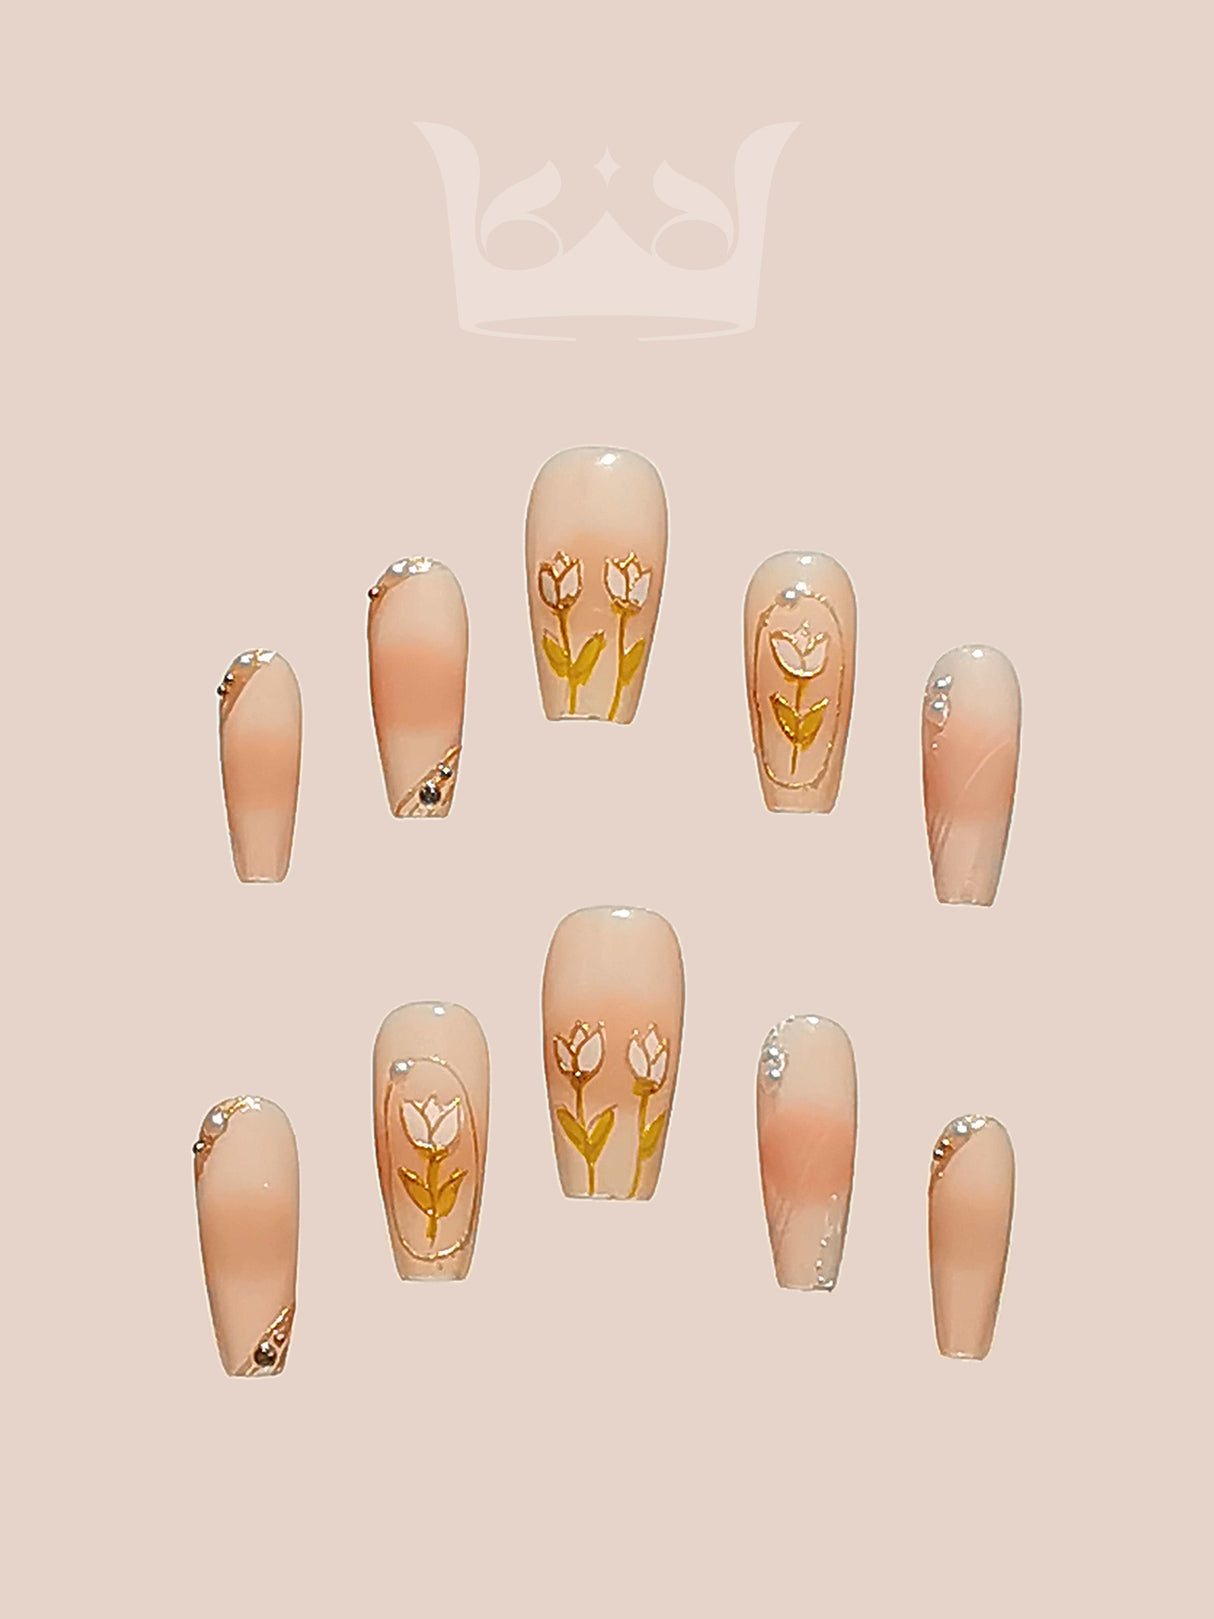 These press-on nails design with floral, glitter, French tips, and gold embellishments. They are chic and understated, suitable for a variety of occasions. 